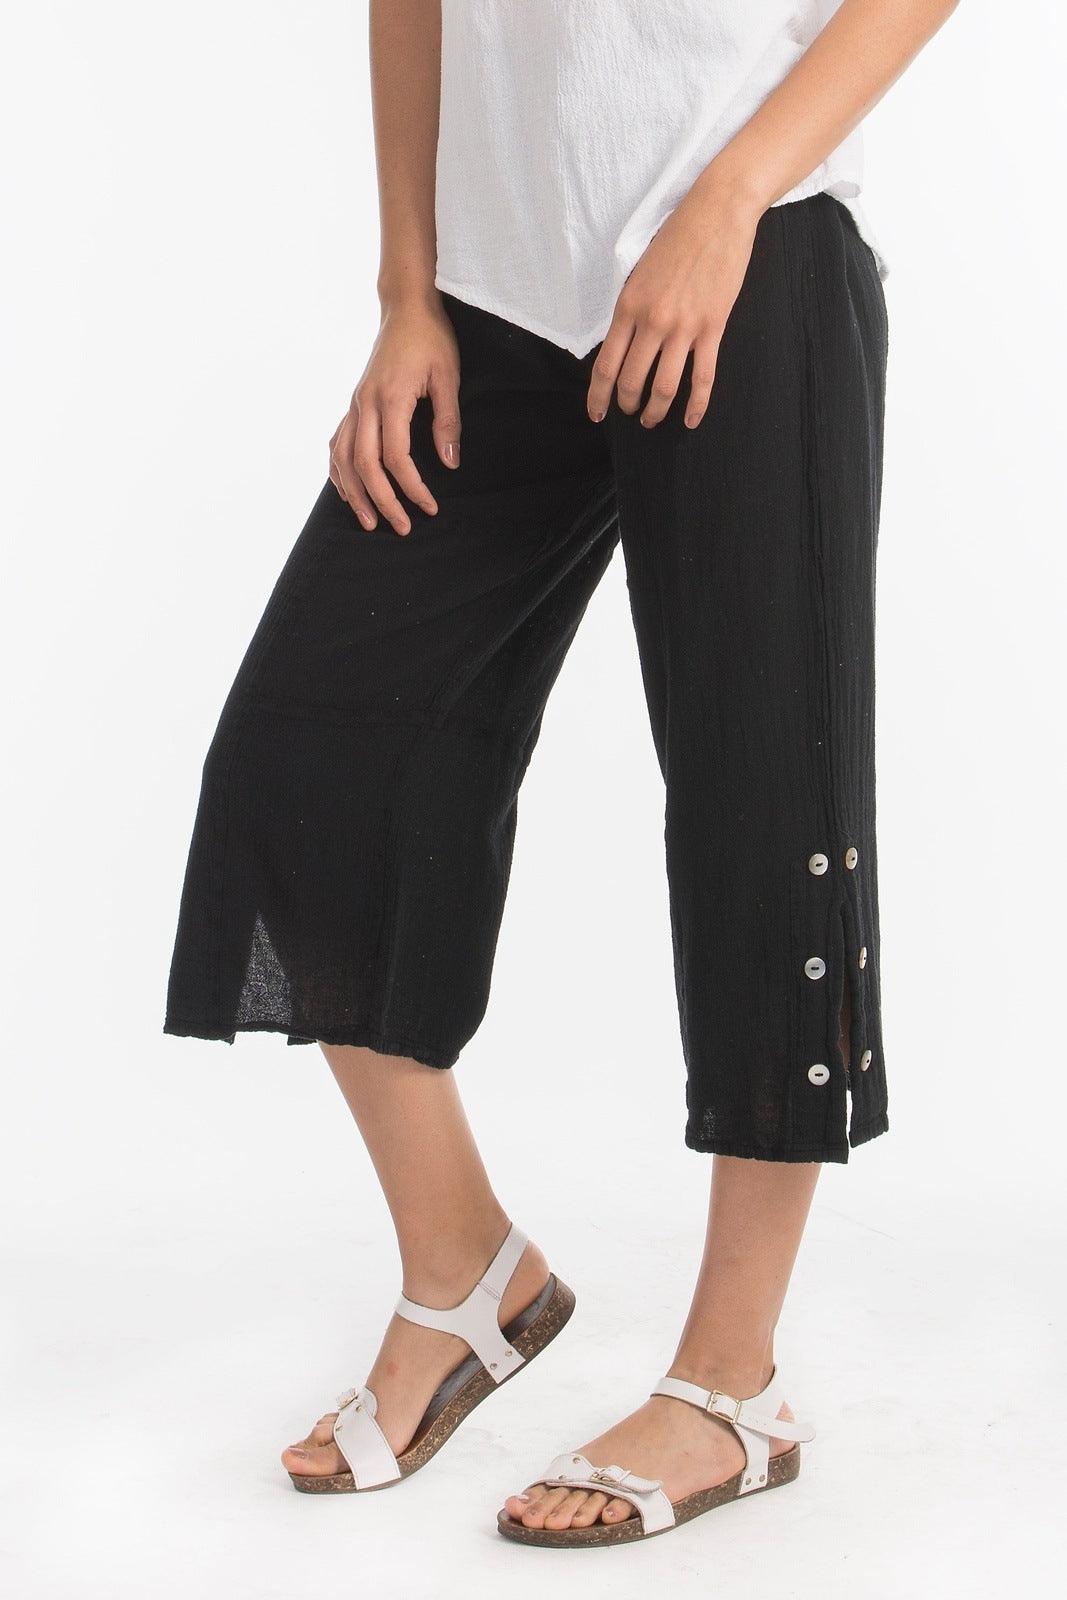 Frankie Pant -Perfect Fit Guaranteed, Now In Sale Colors!